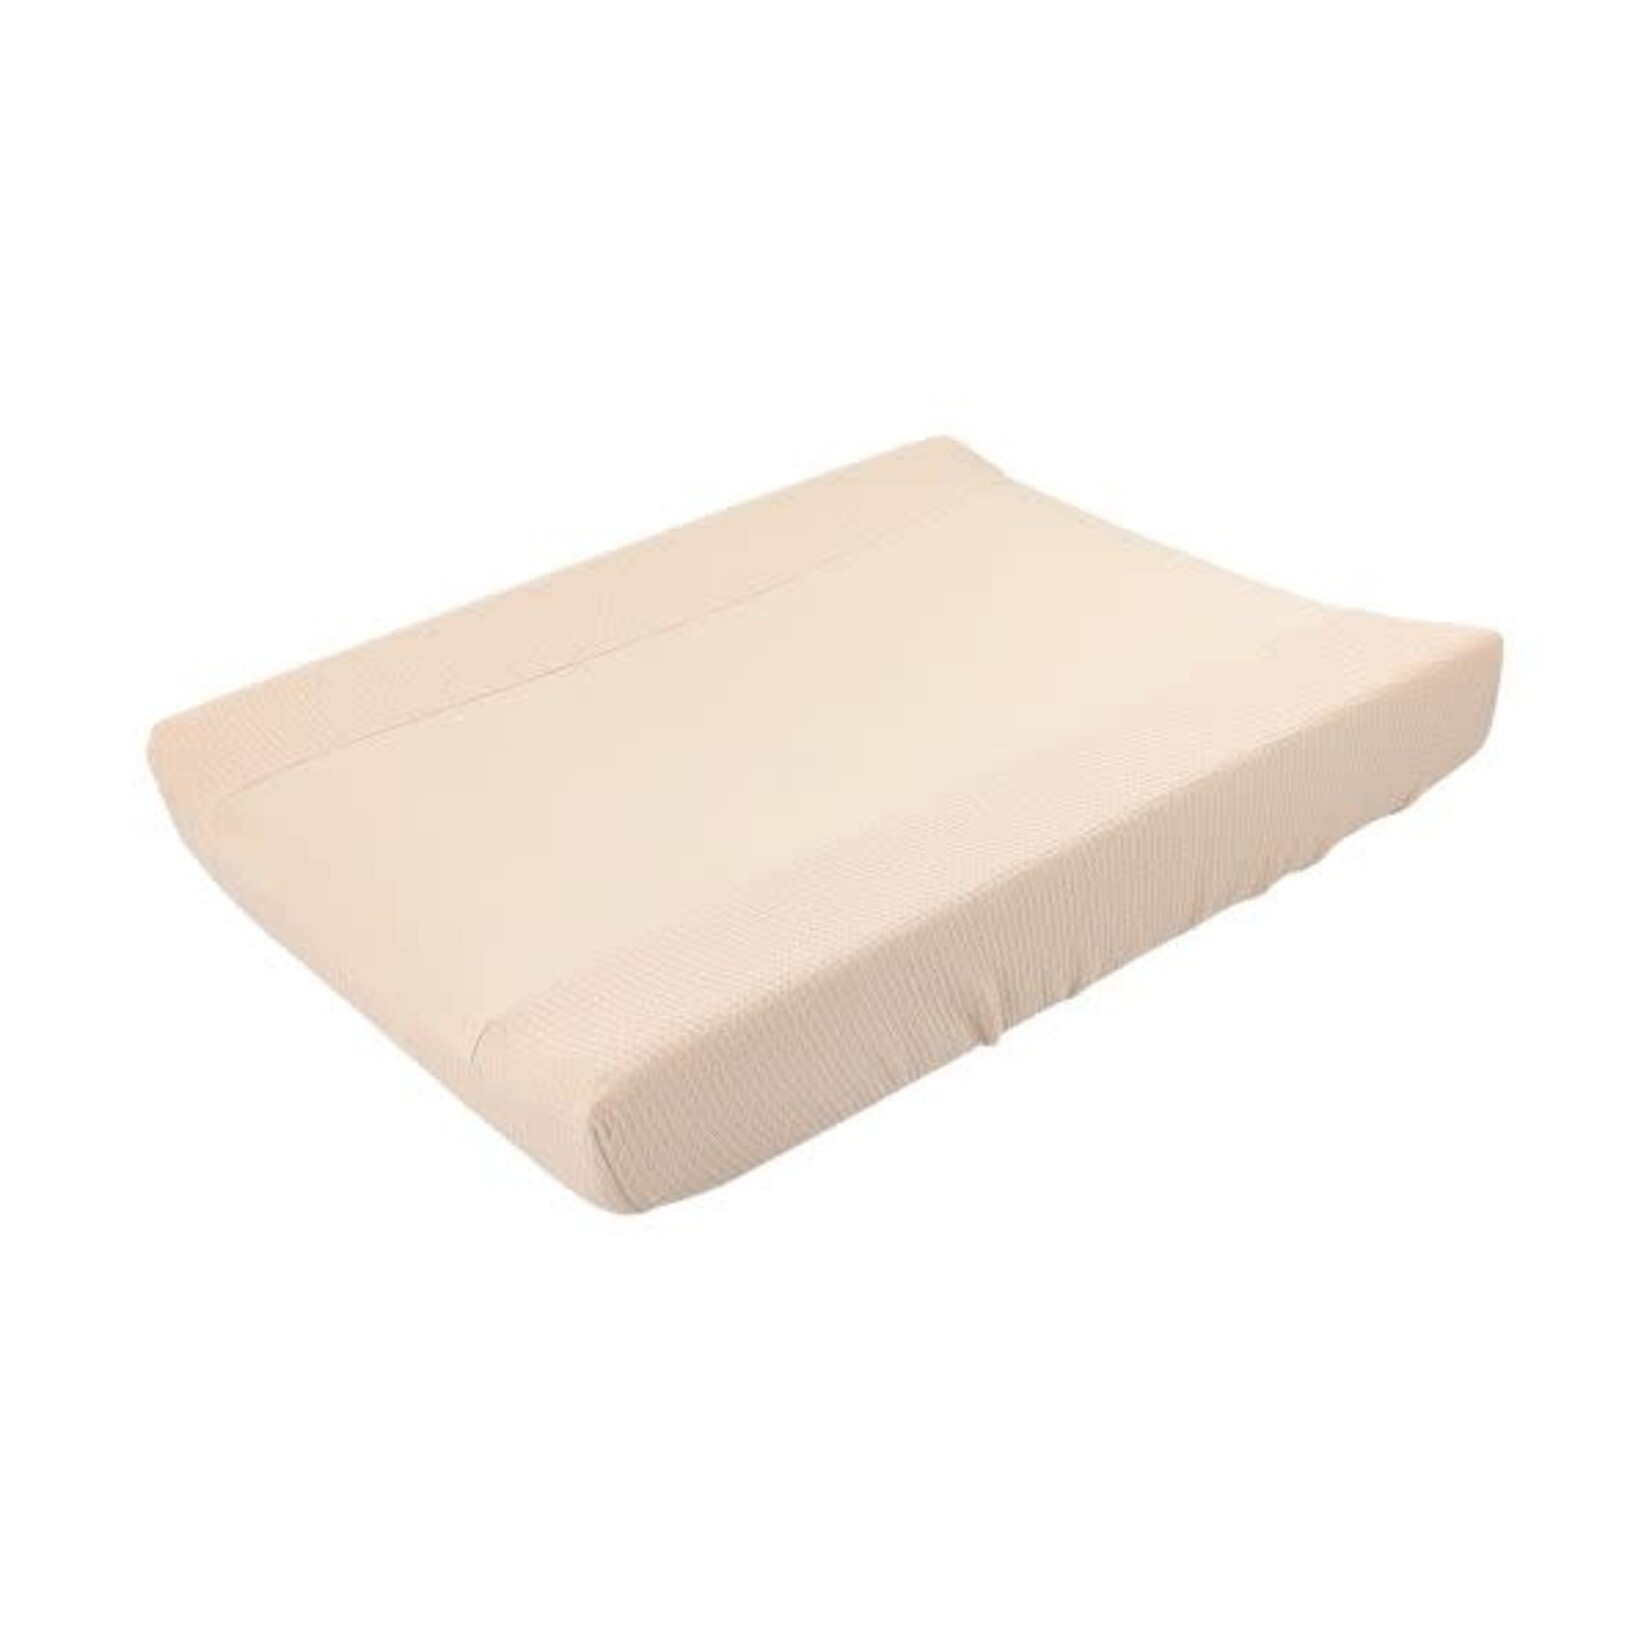 Trixie Trixie - Changing pad cover  xcm - Cocoon Blush